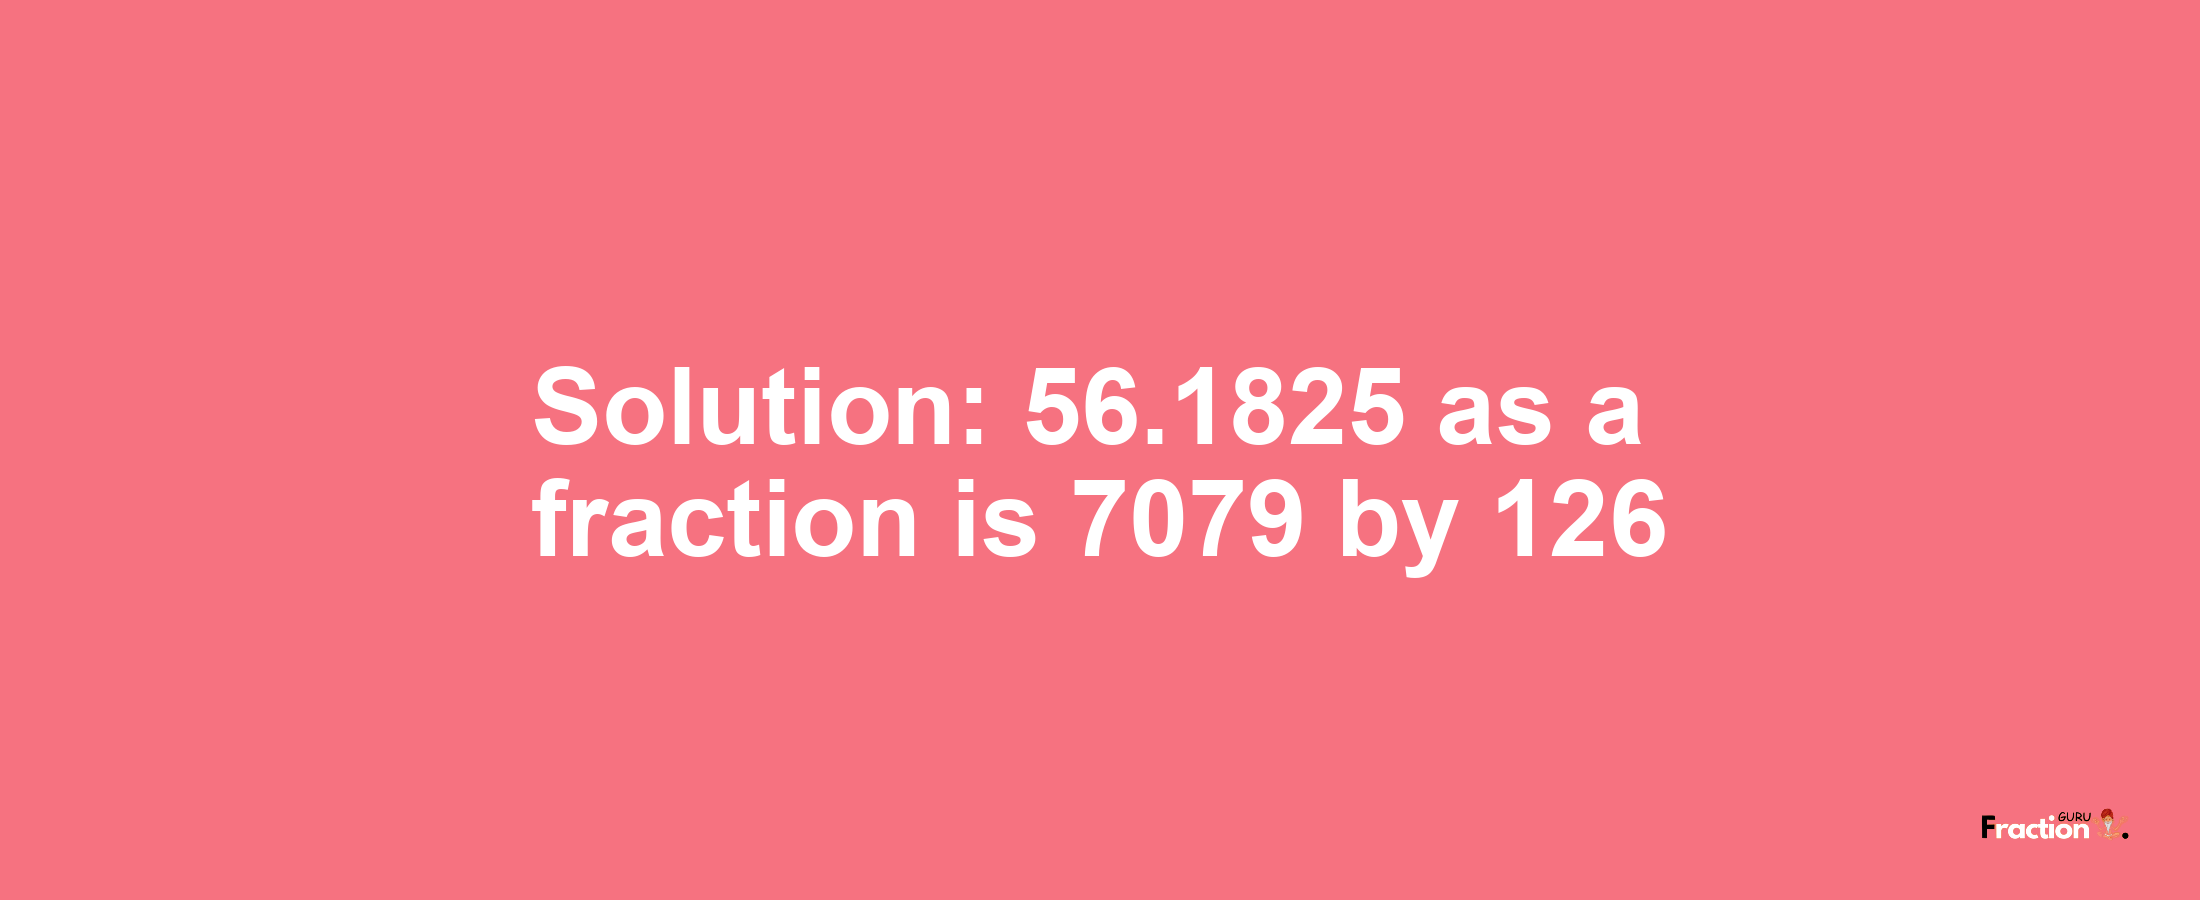 Solution:56.1825 as a fraction is 7079/126